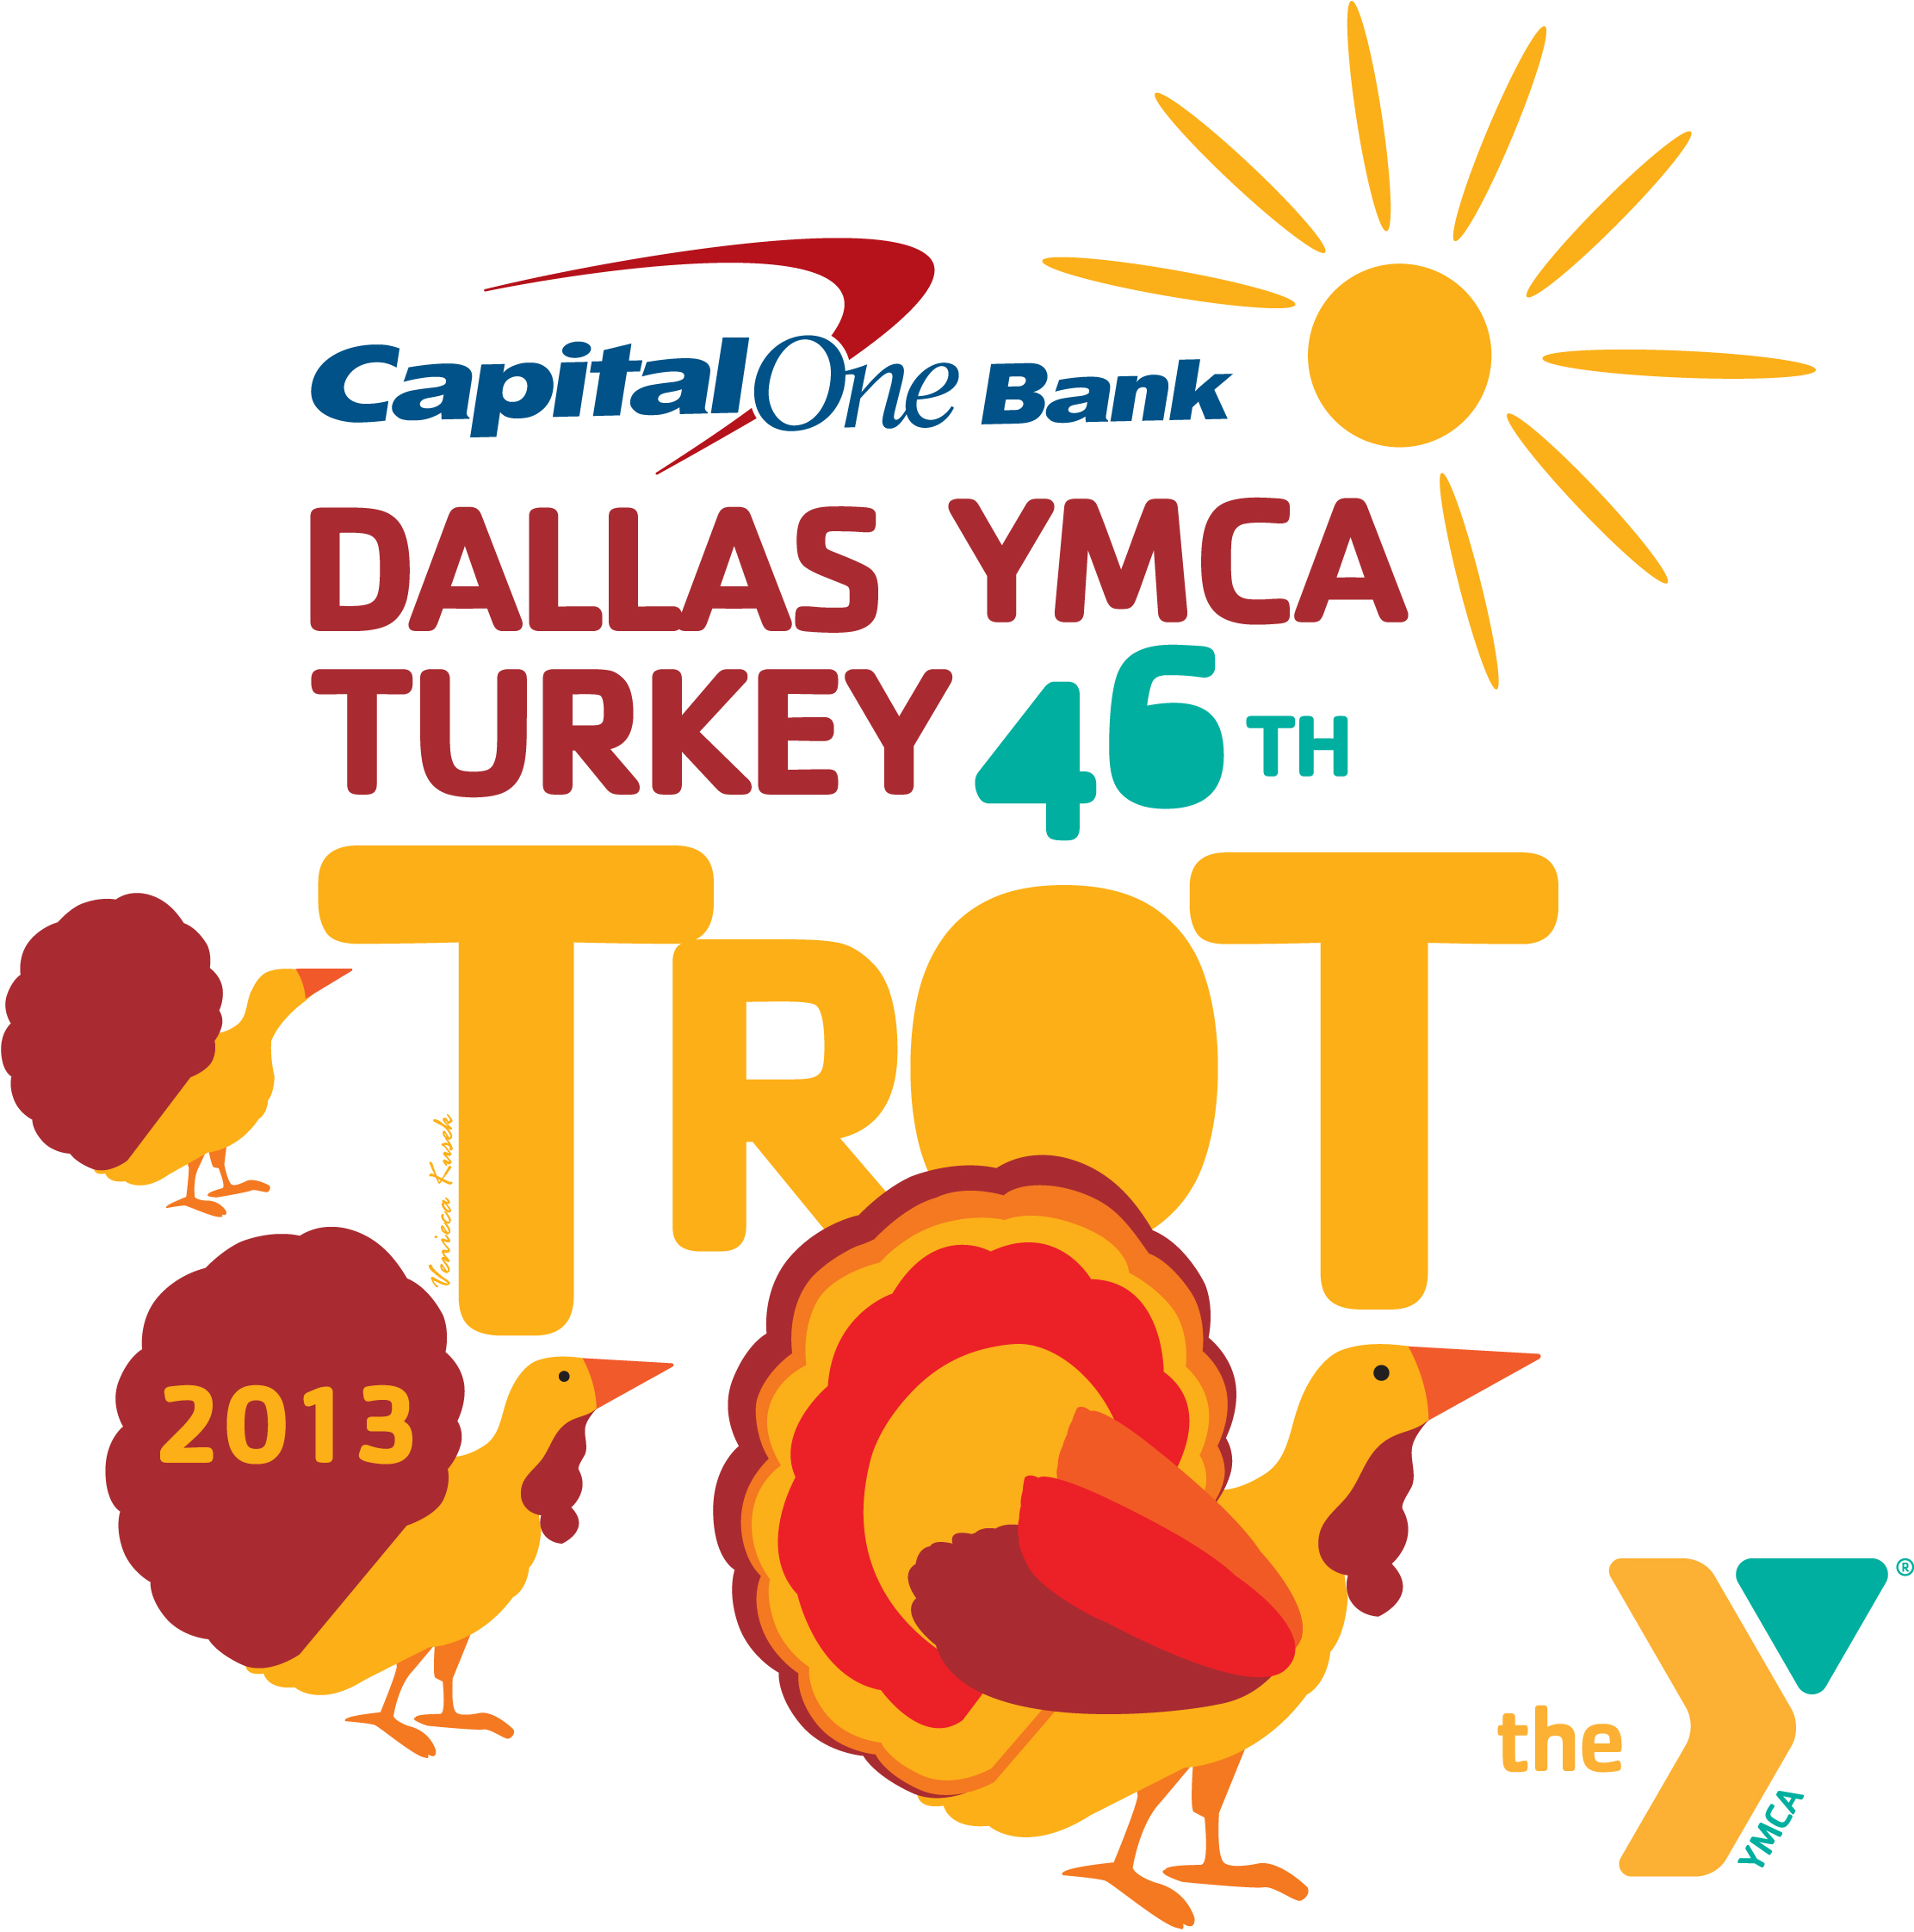 Social Media Drives the Success of the 46th Annual Dallas YMCA Turkey Trot